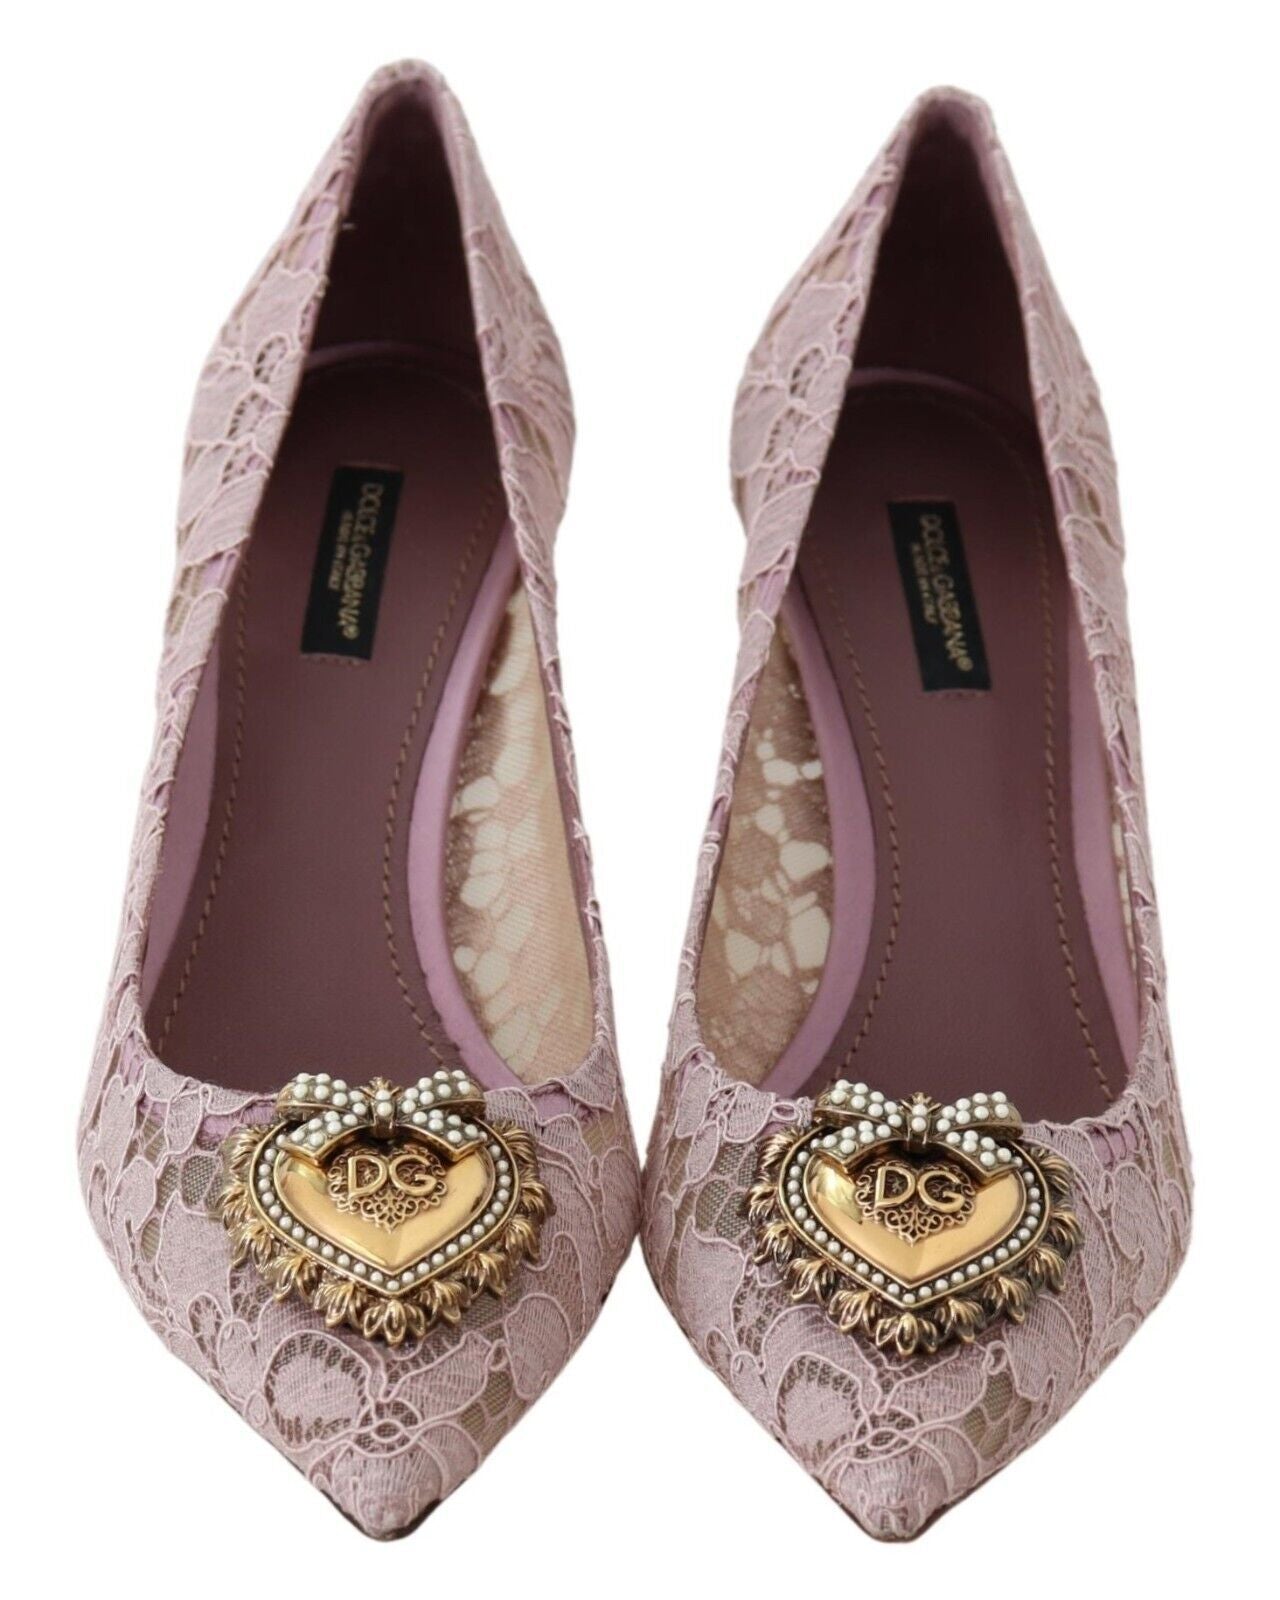 Elegant Pink Lace Heels with Heart Embellishment